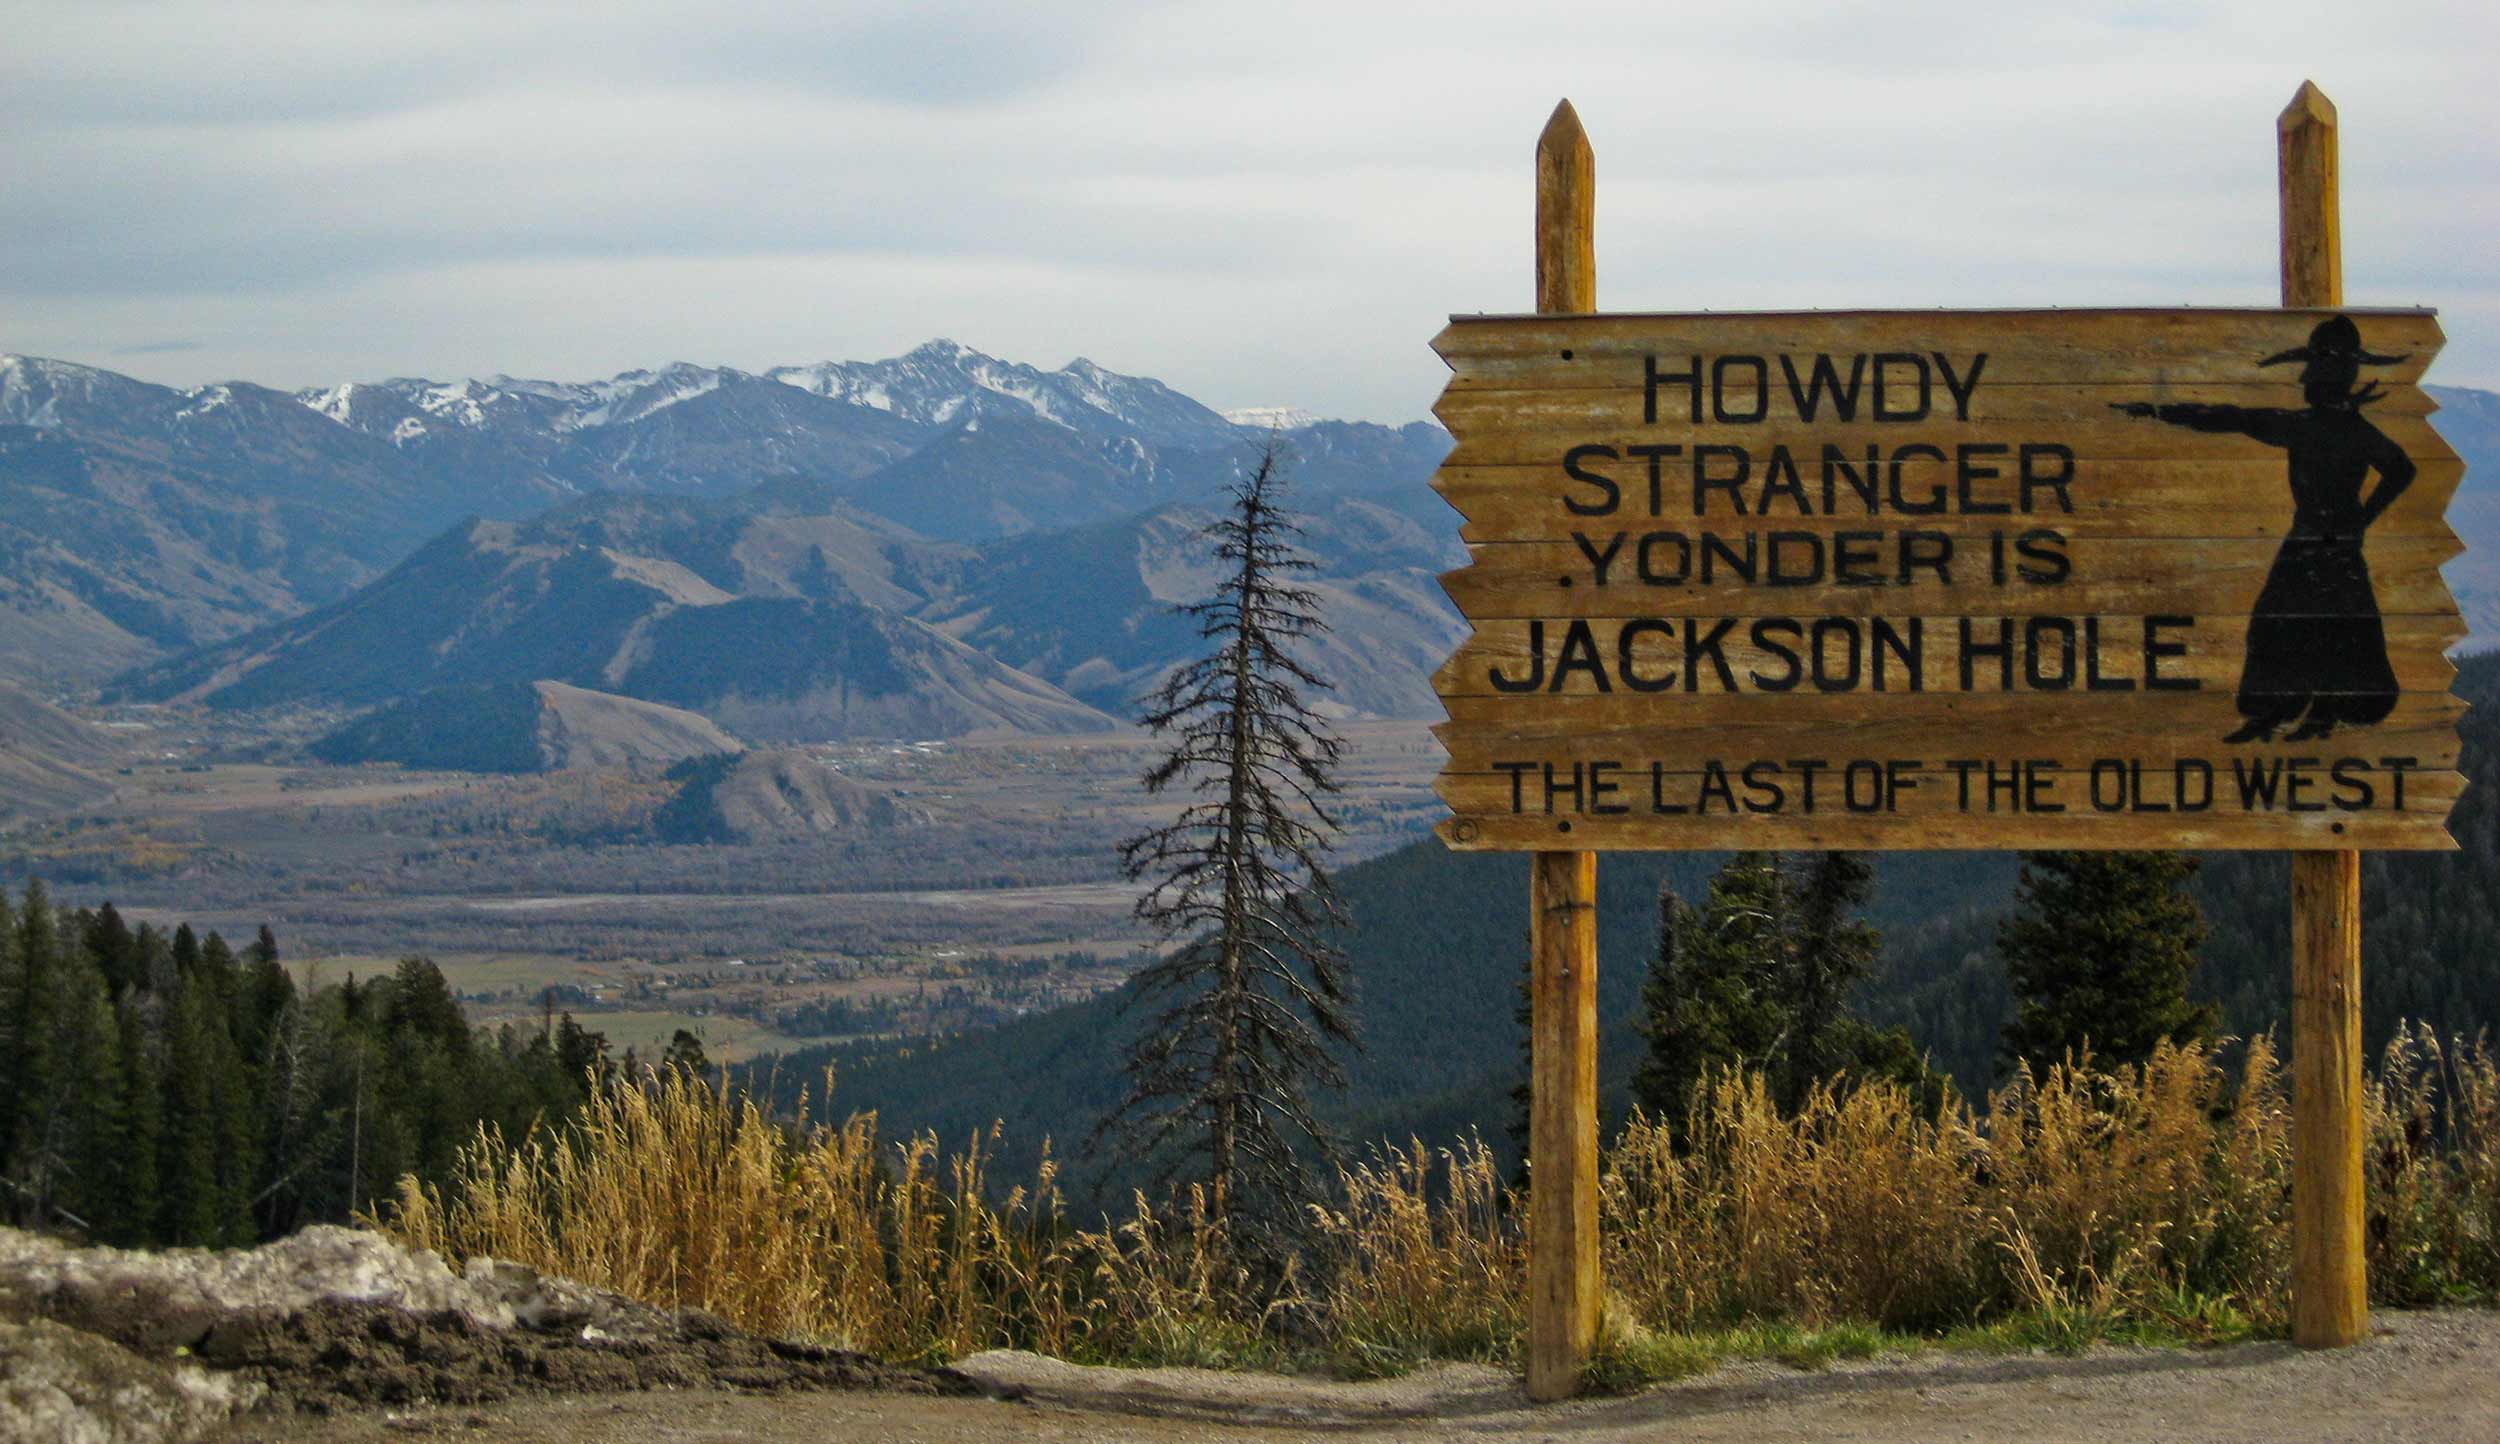 Jackson Hole Sign Summer-Howdy Stranger-Yonder is Jackson Hole-The Last of the Old West